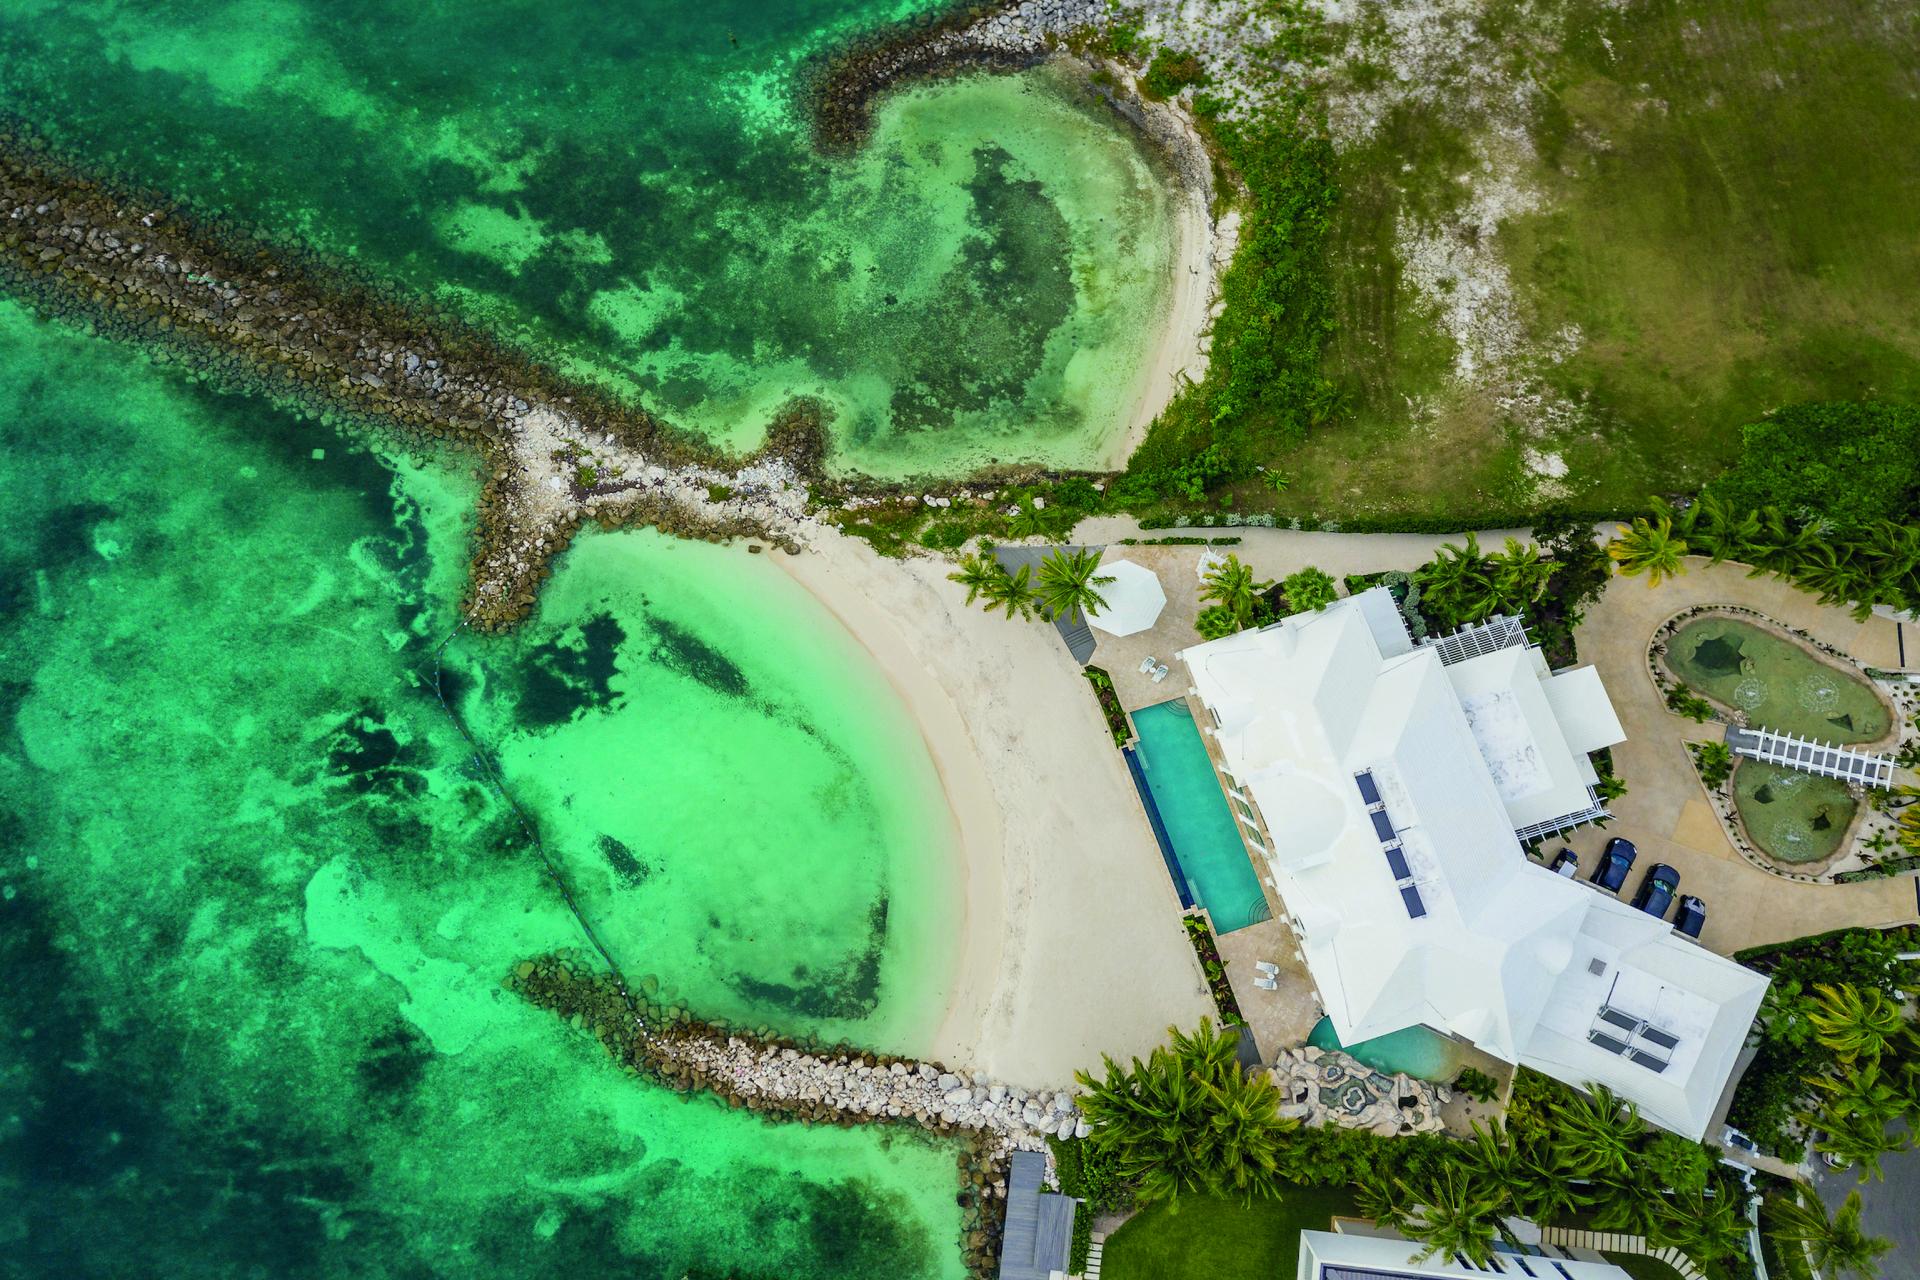 Property Investment: Bahamas Oceanfront Vacation Home ELISIUM